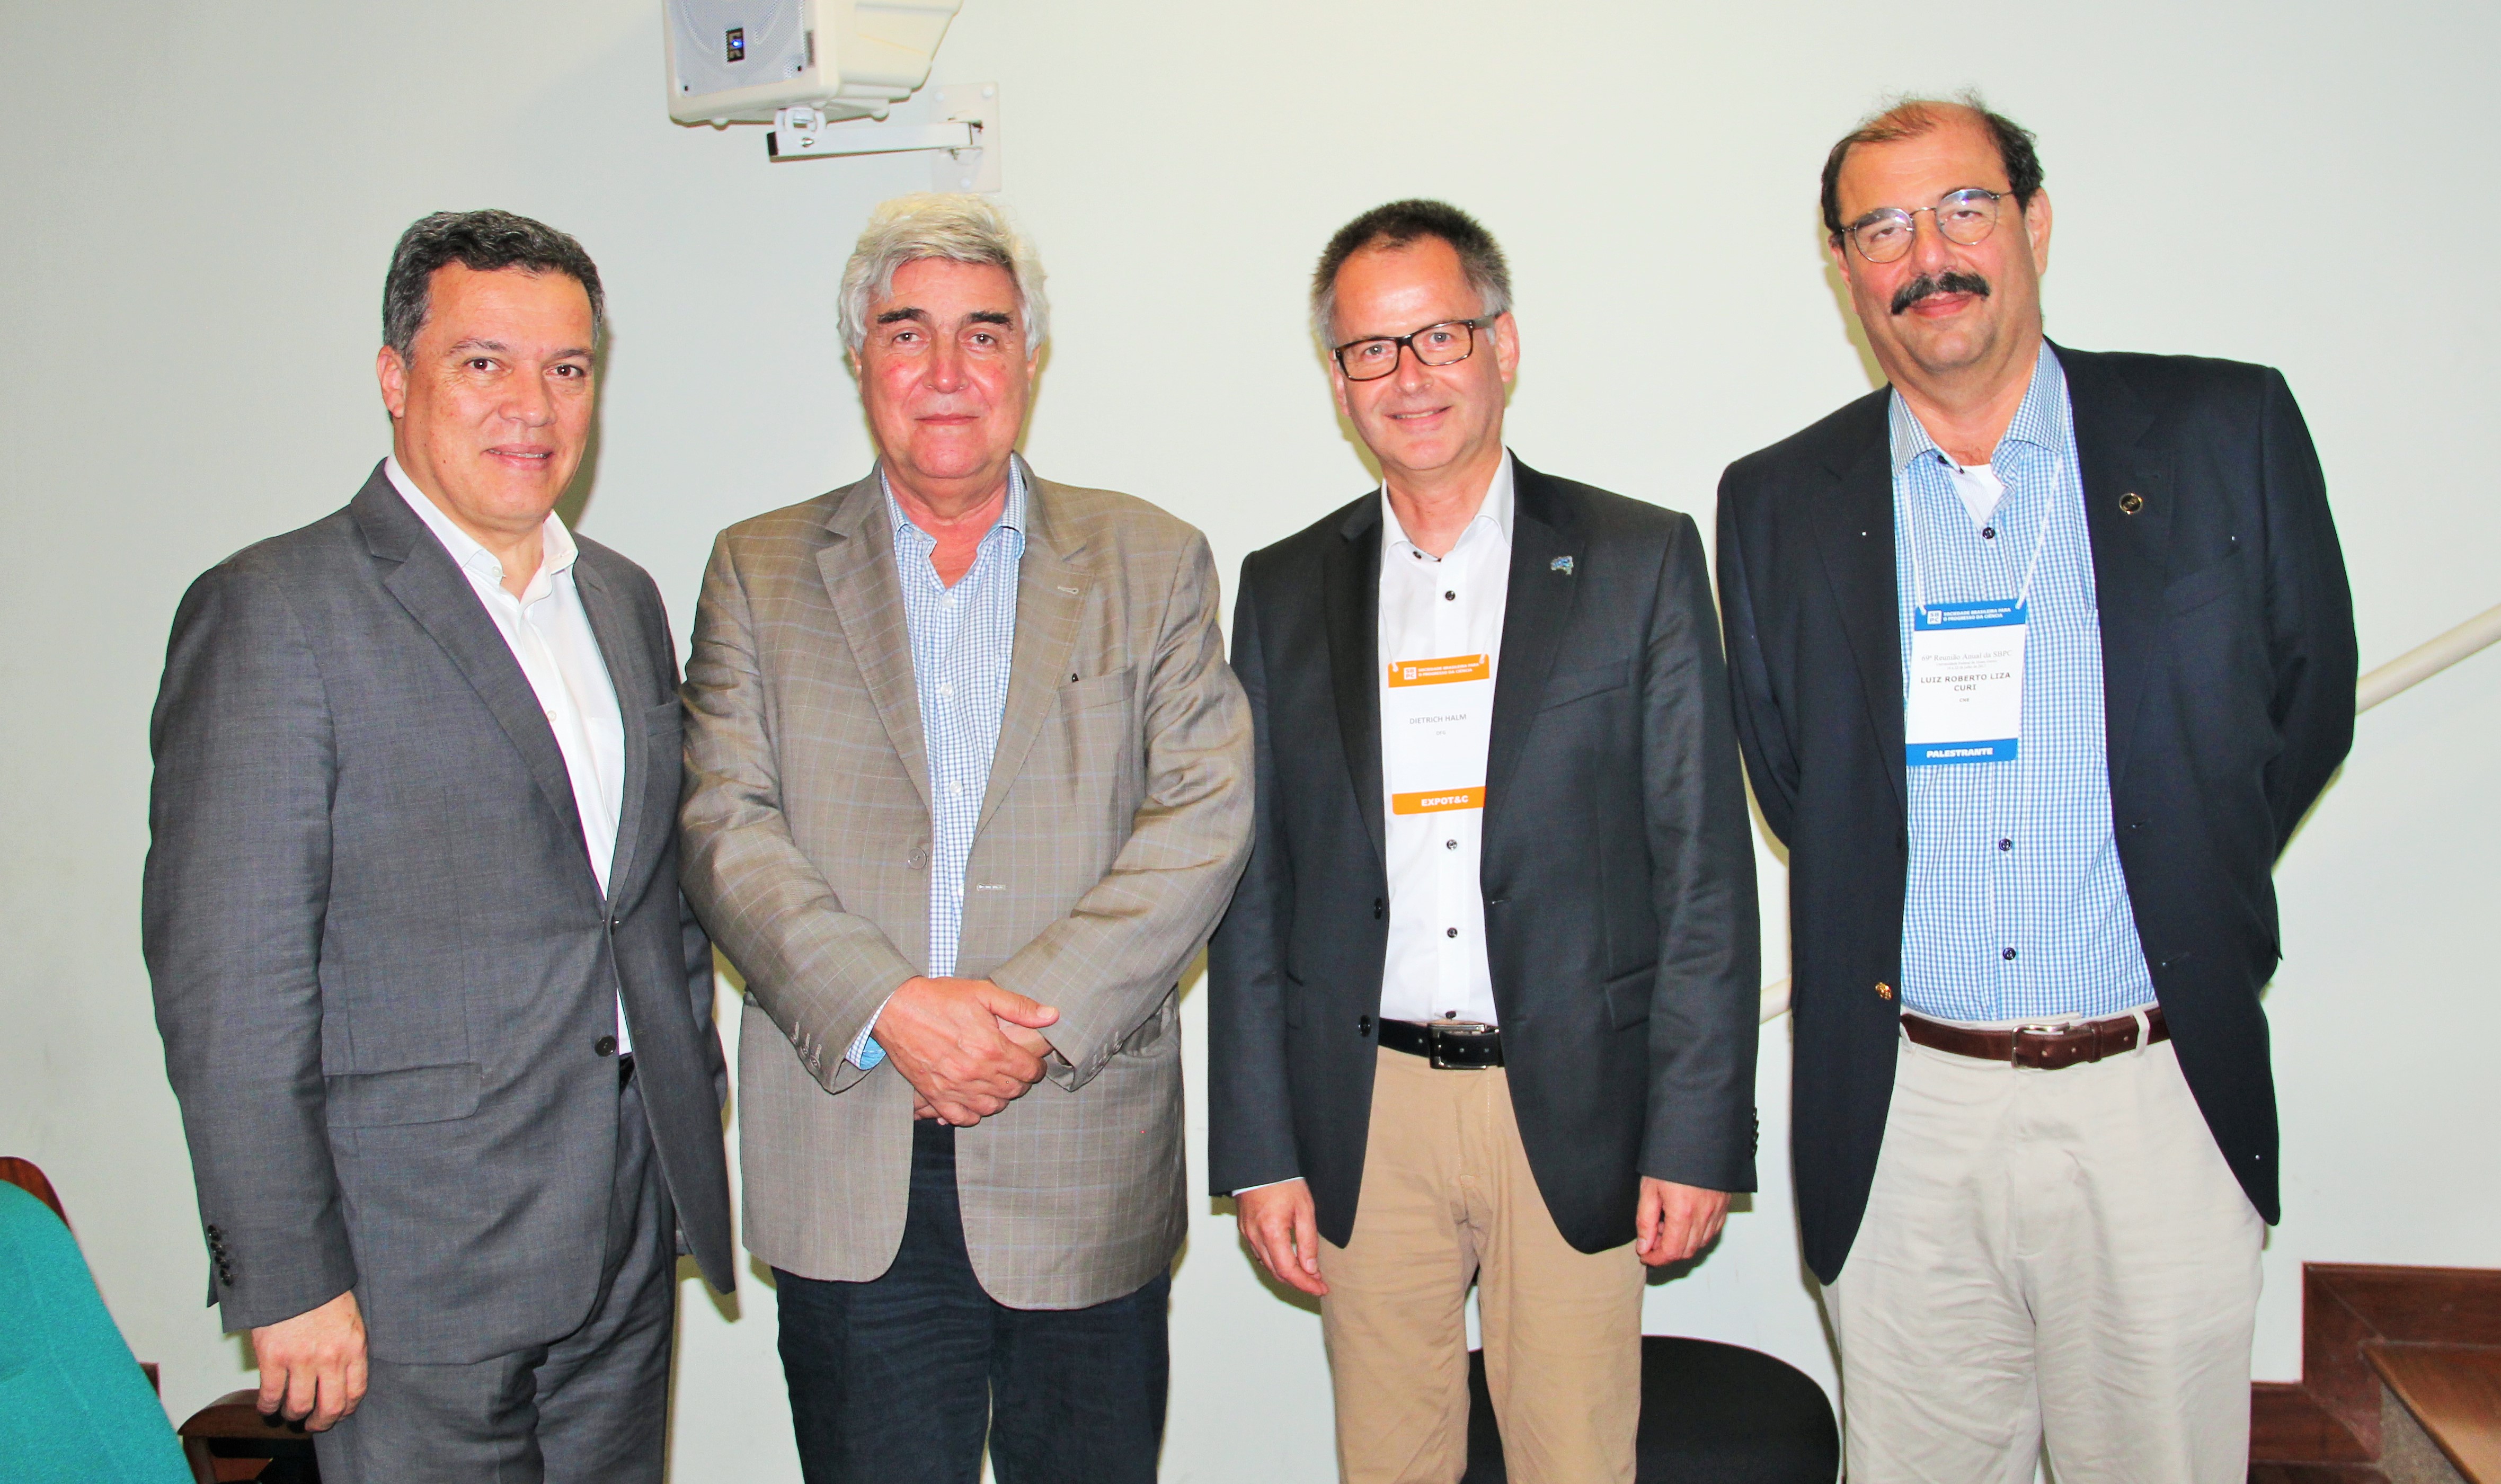 Jaime Ramírez, Rector of the UFMG; Abílio Neves, President of CAPES; Dietrich Halm, DFG Director for International Affairs Latin America, and Luiz Roberto Curi, of the MCTIC